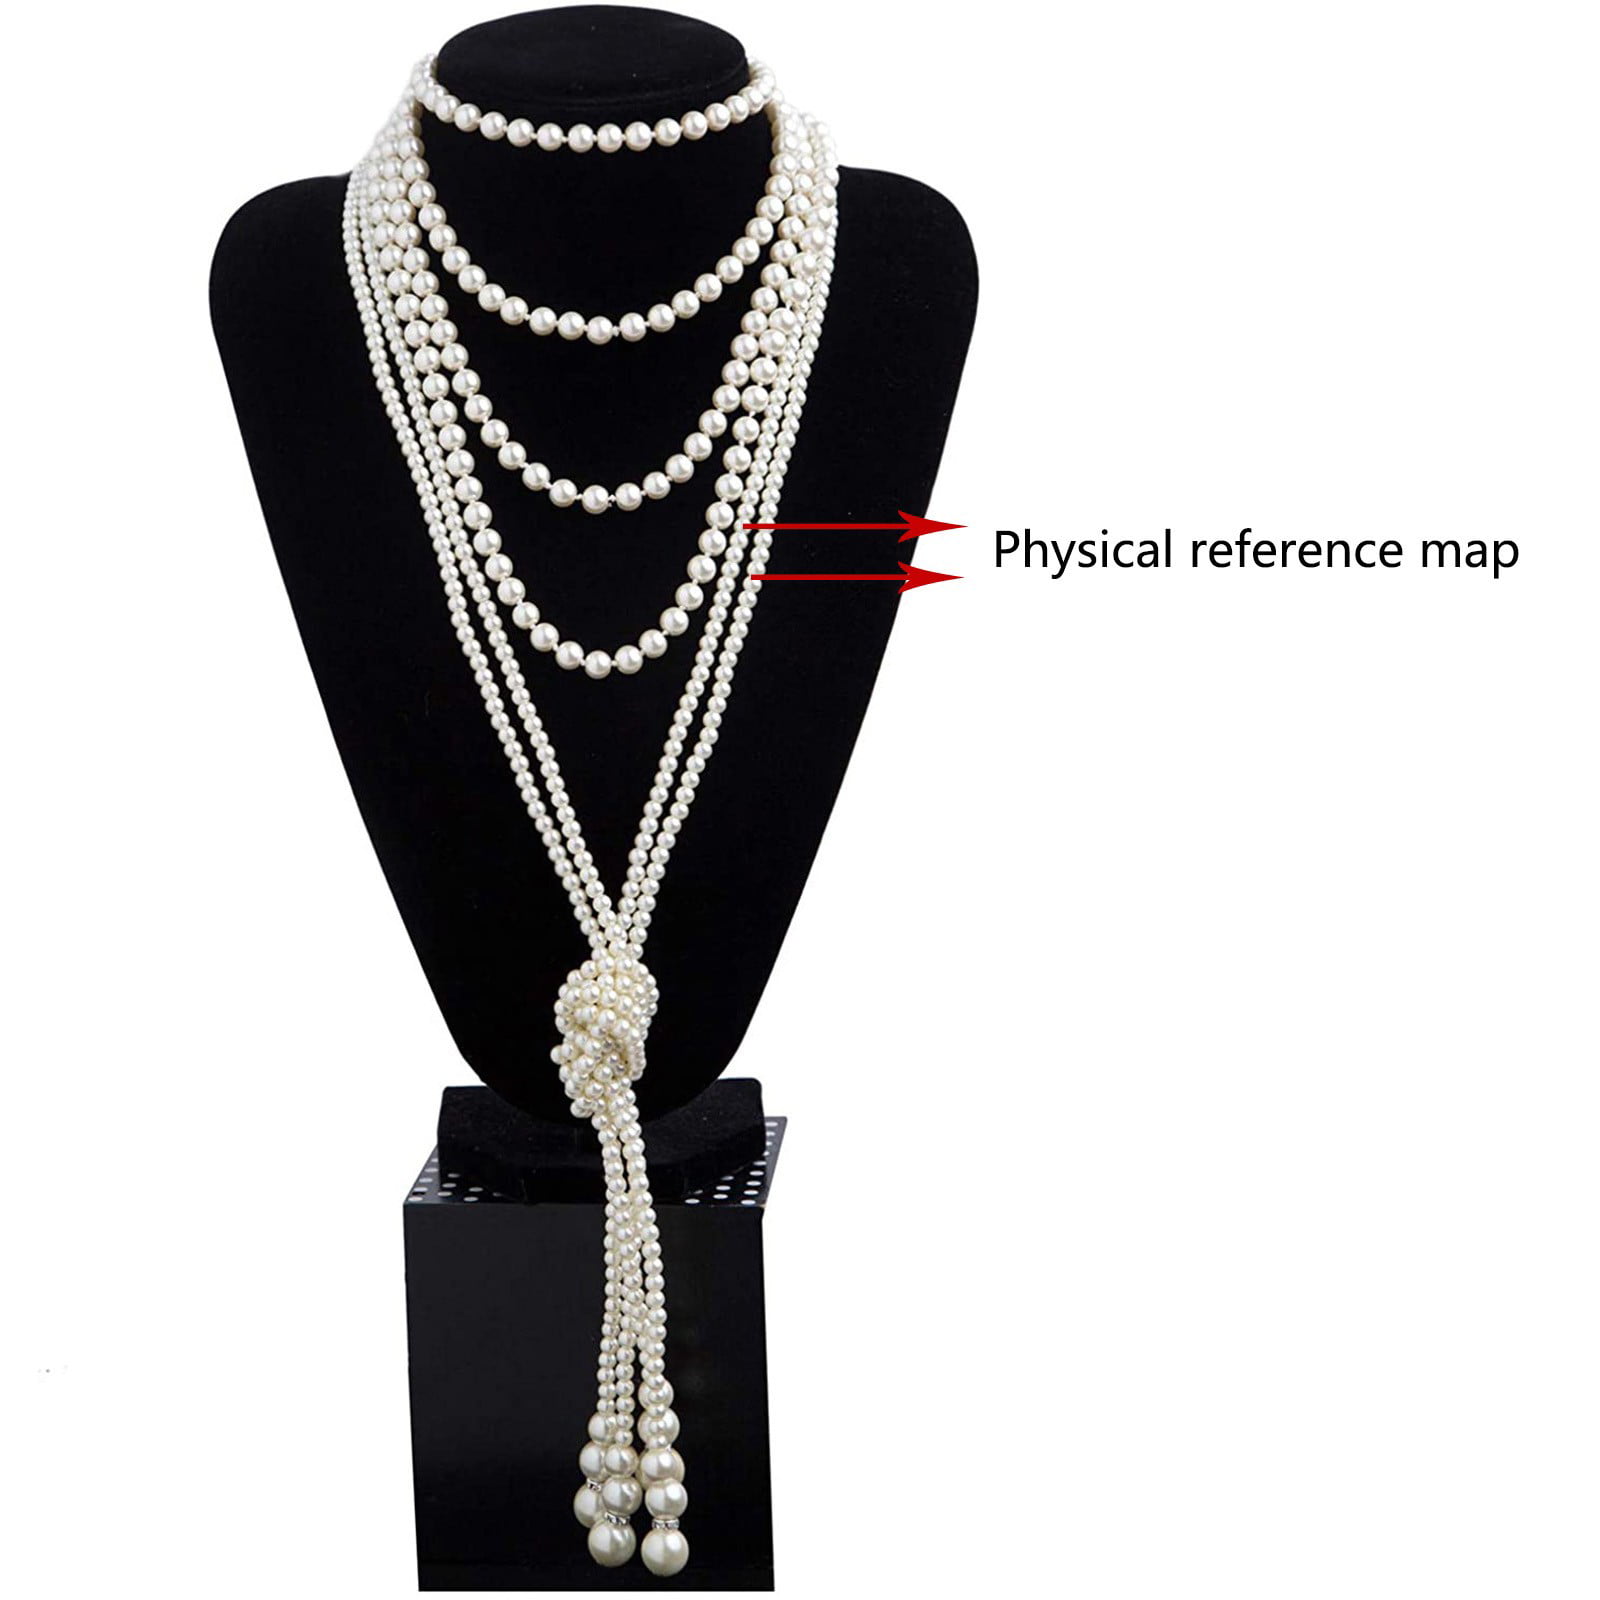 Zivyes Fashion Faux Pearls 1920s Pearls Necklace Gatsby Accessories Cluster 59 inch Long Necklace for Women A-1 * 59 inch Necklace + 2 * 45 inchknot